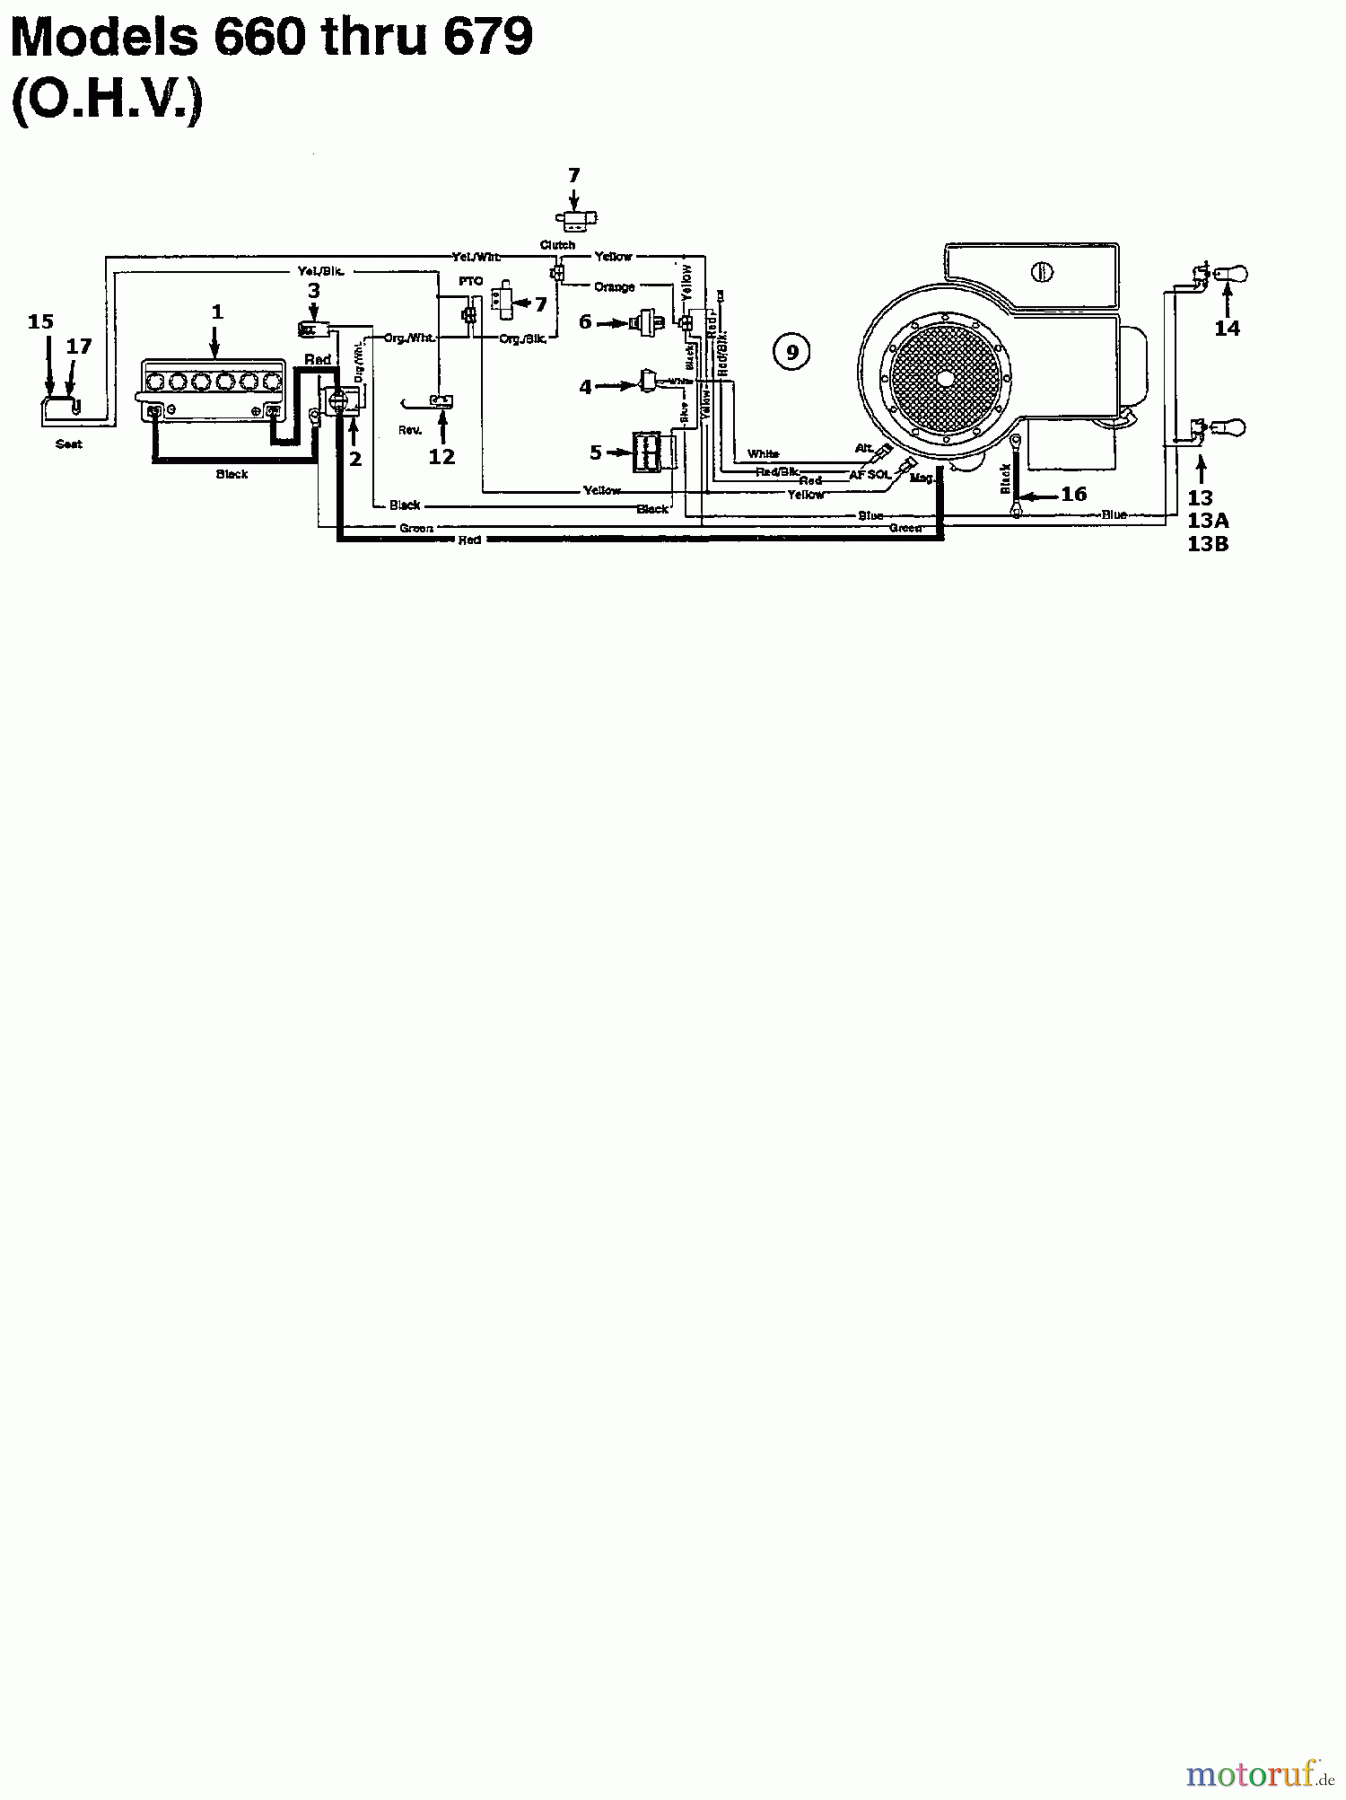  Columbia Lawn tractors 145/107 135M671G626  (1995) Wiring diagram for O.H.V.